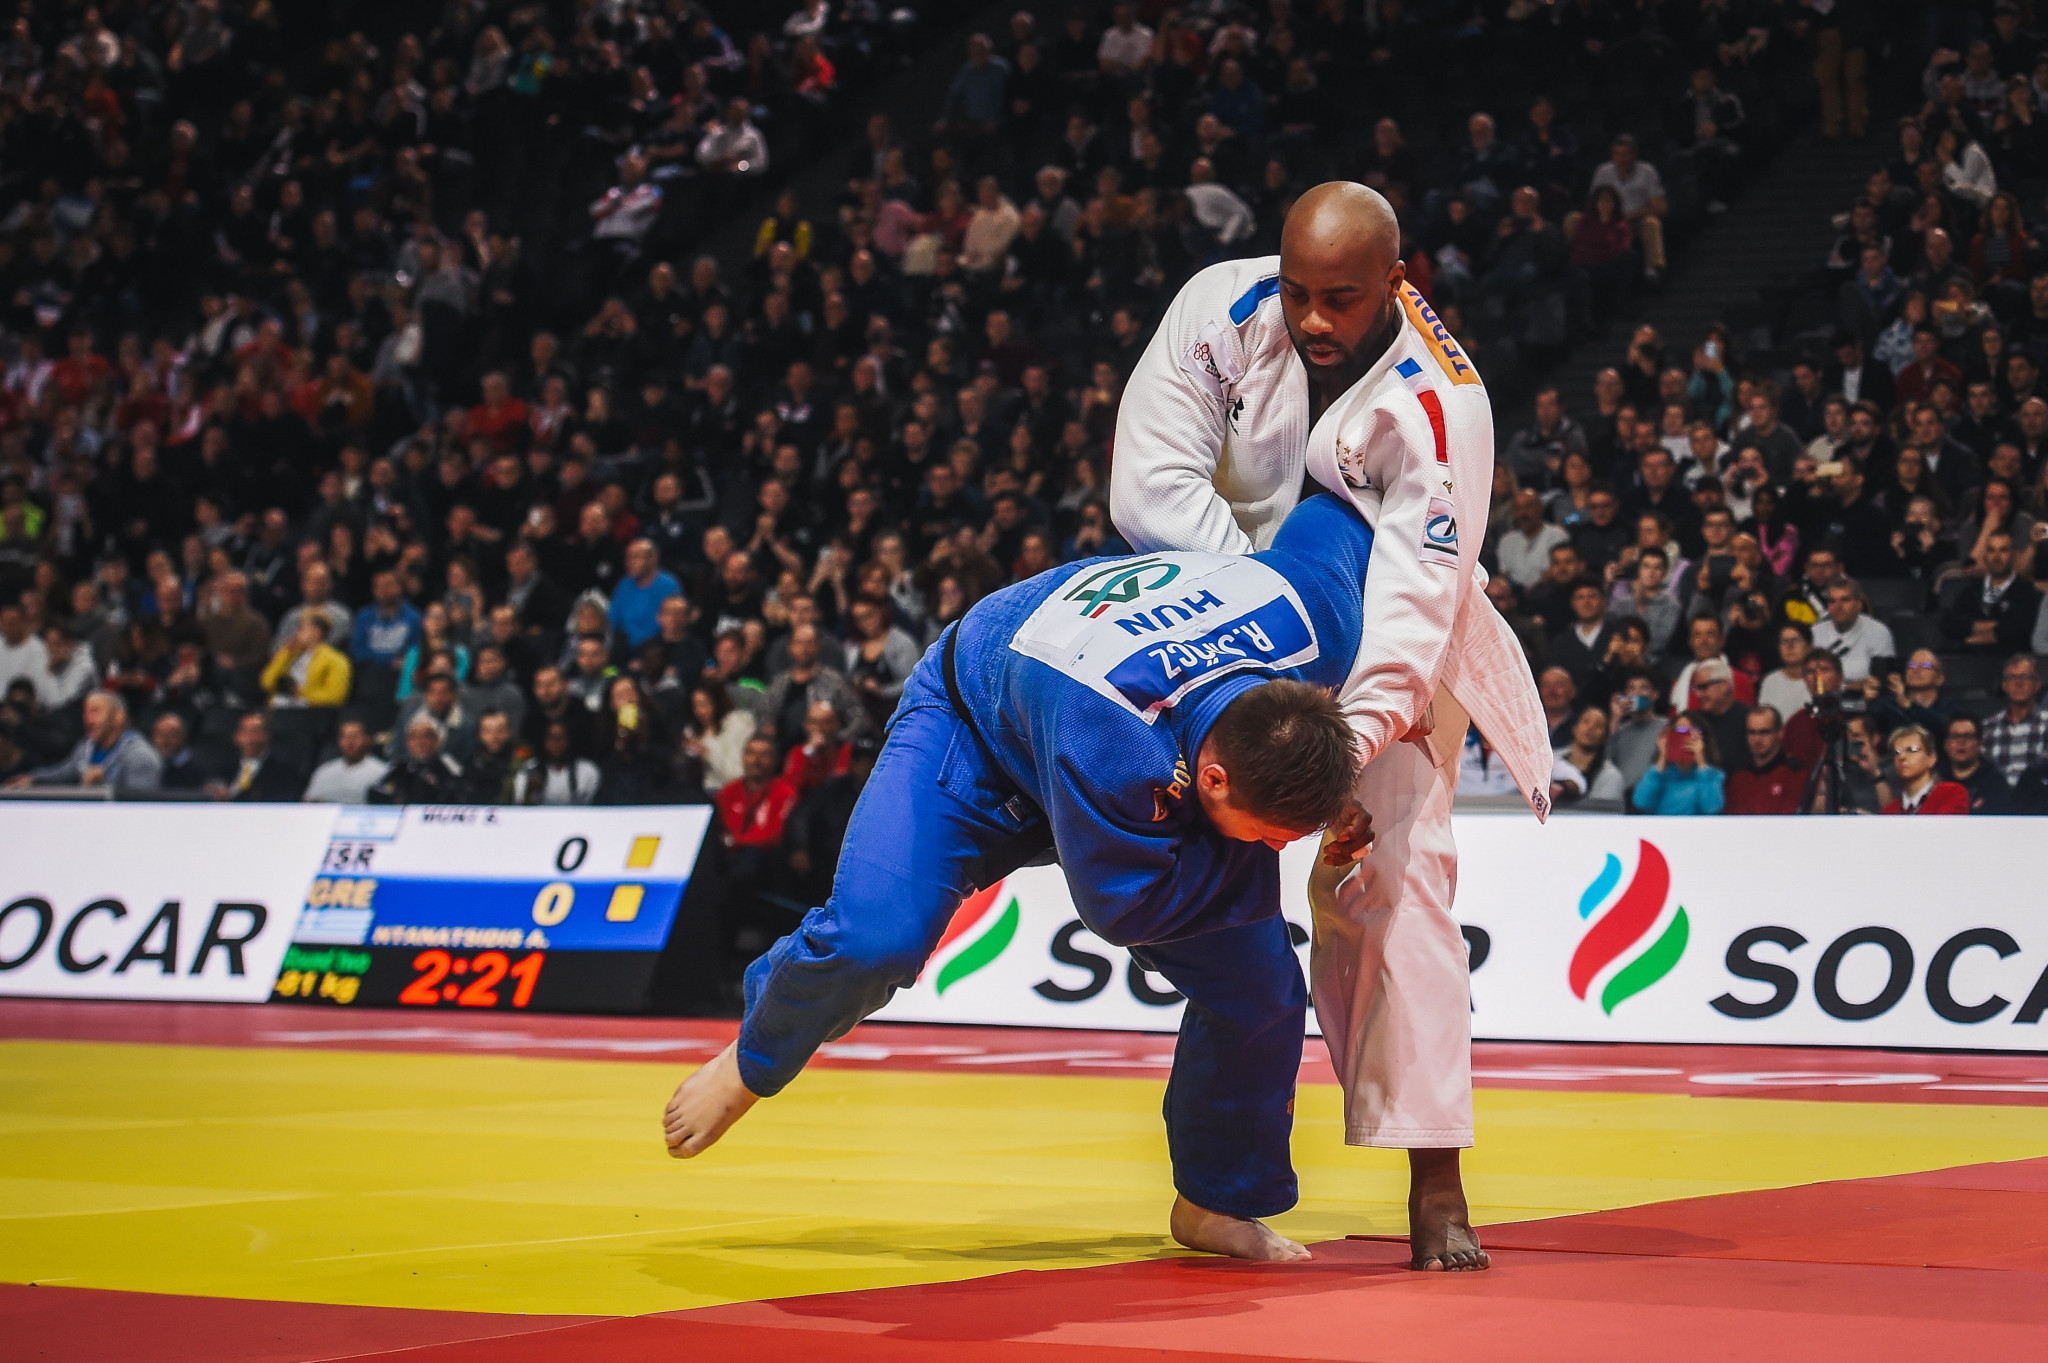 IJF confirms initial World Judo Tour schedule for 2023